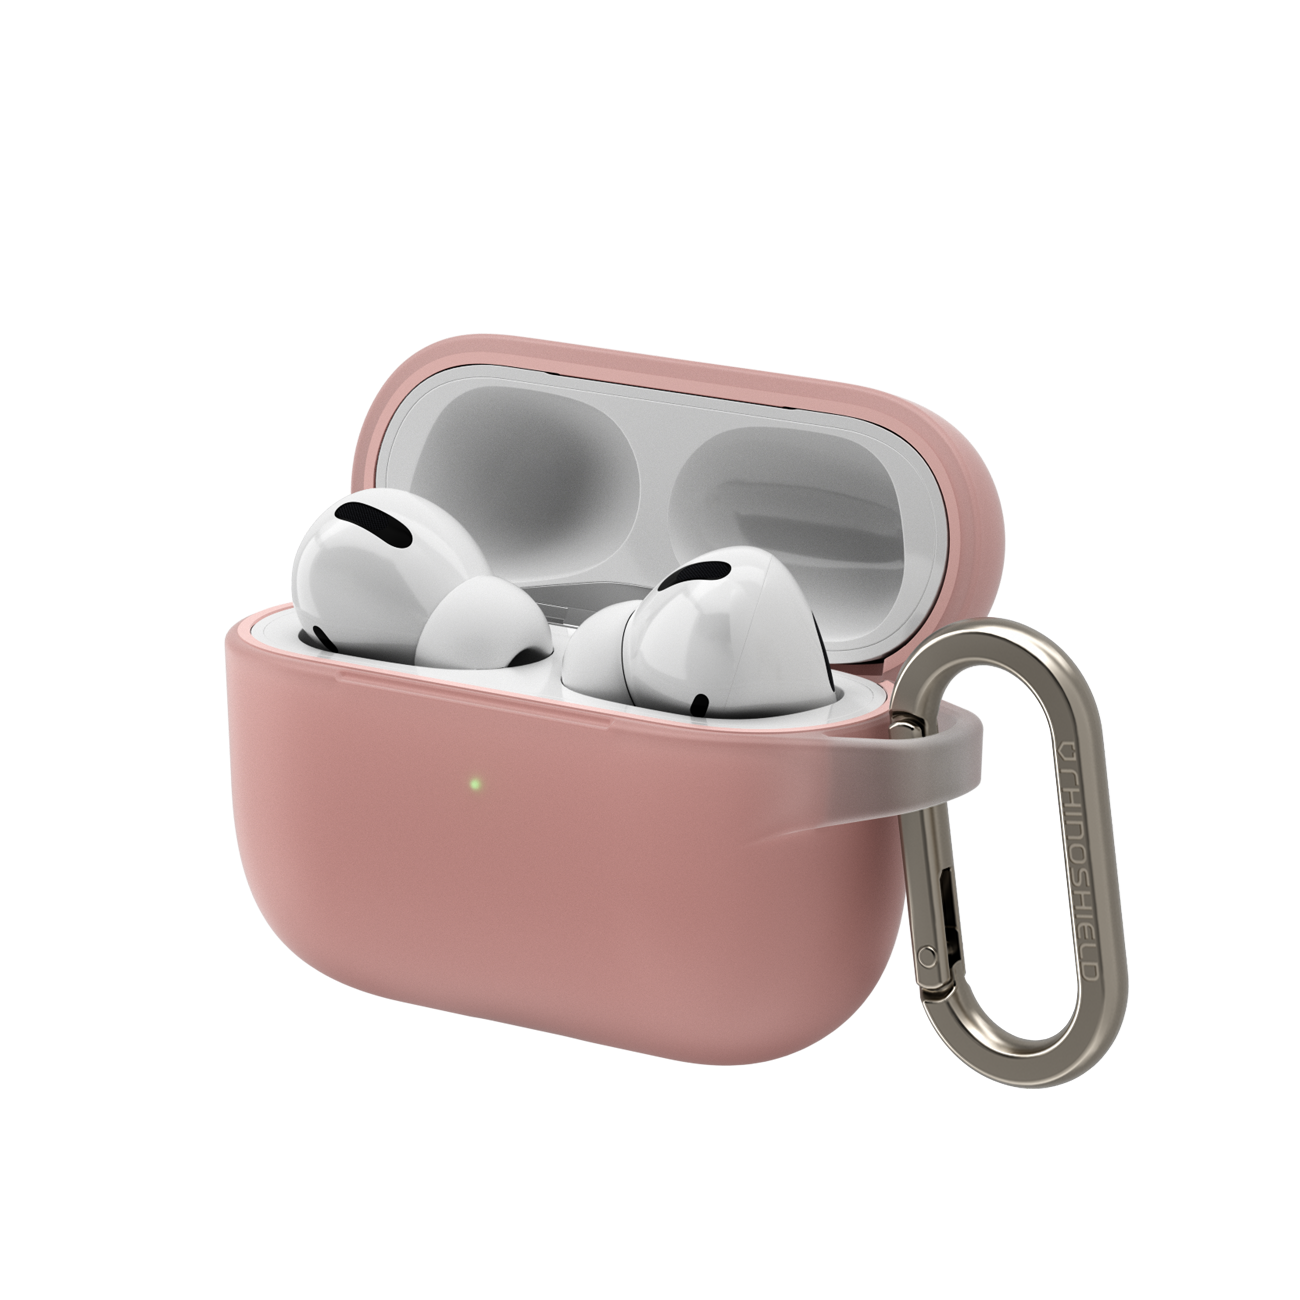 RhinoShield Impact Resistant Case For AirPods Pro - Shell Pink - Mac Addict